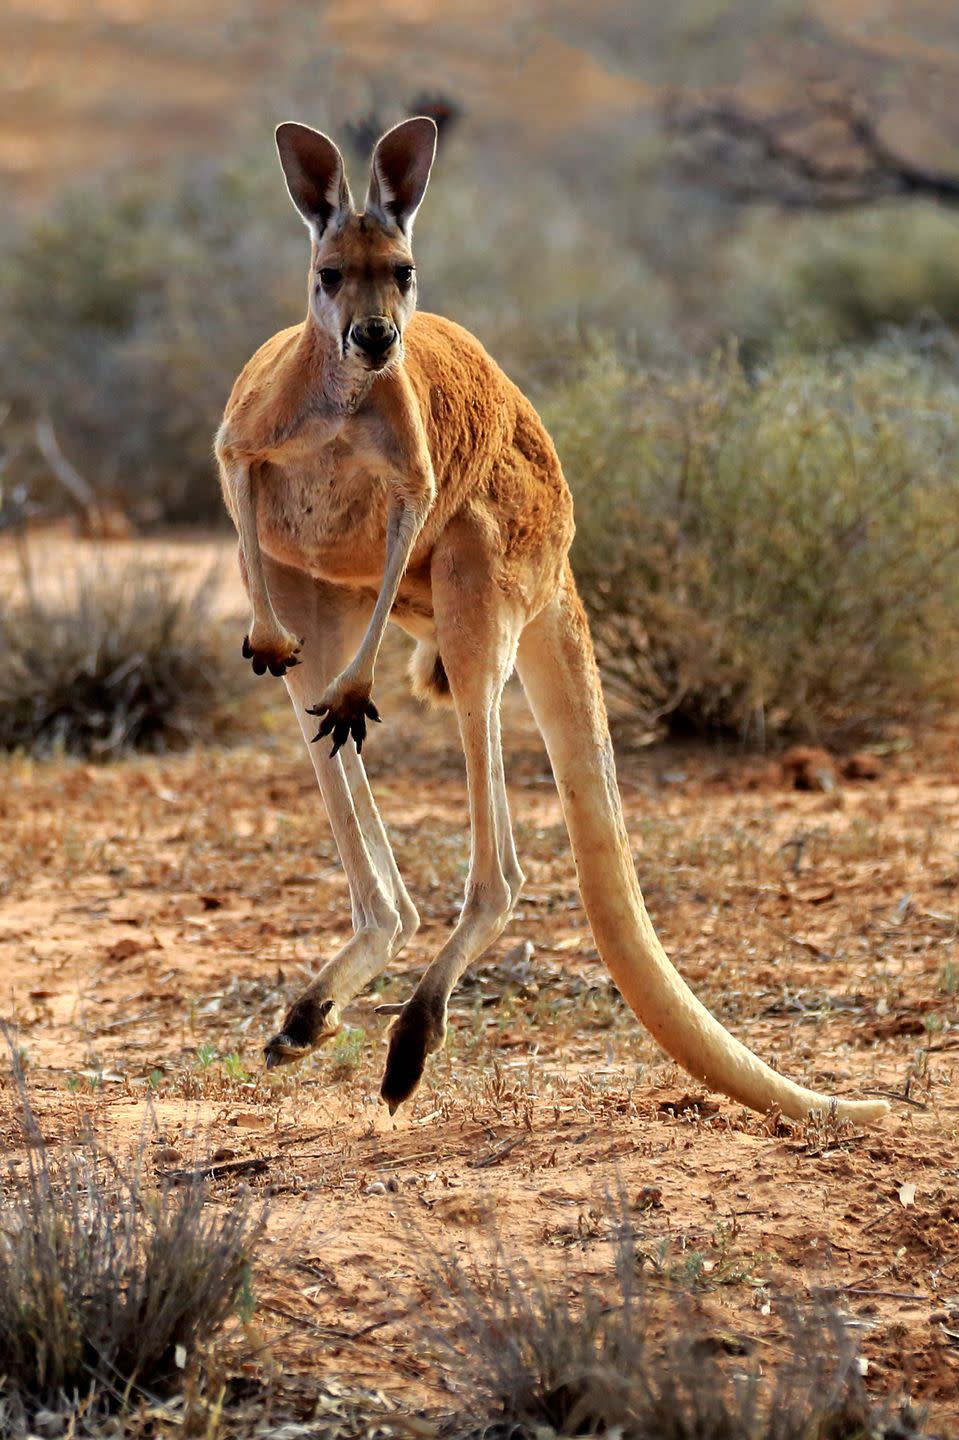 <p>Kangaroos can jump over 27 feet in one bound. They can accomplish this thanks to having small front legs and a long, strong tail that helps keep them balanced while jumping.</p>